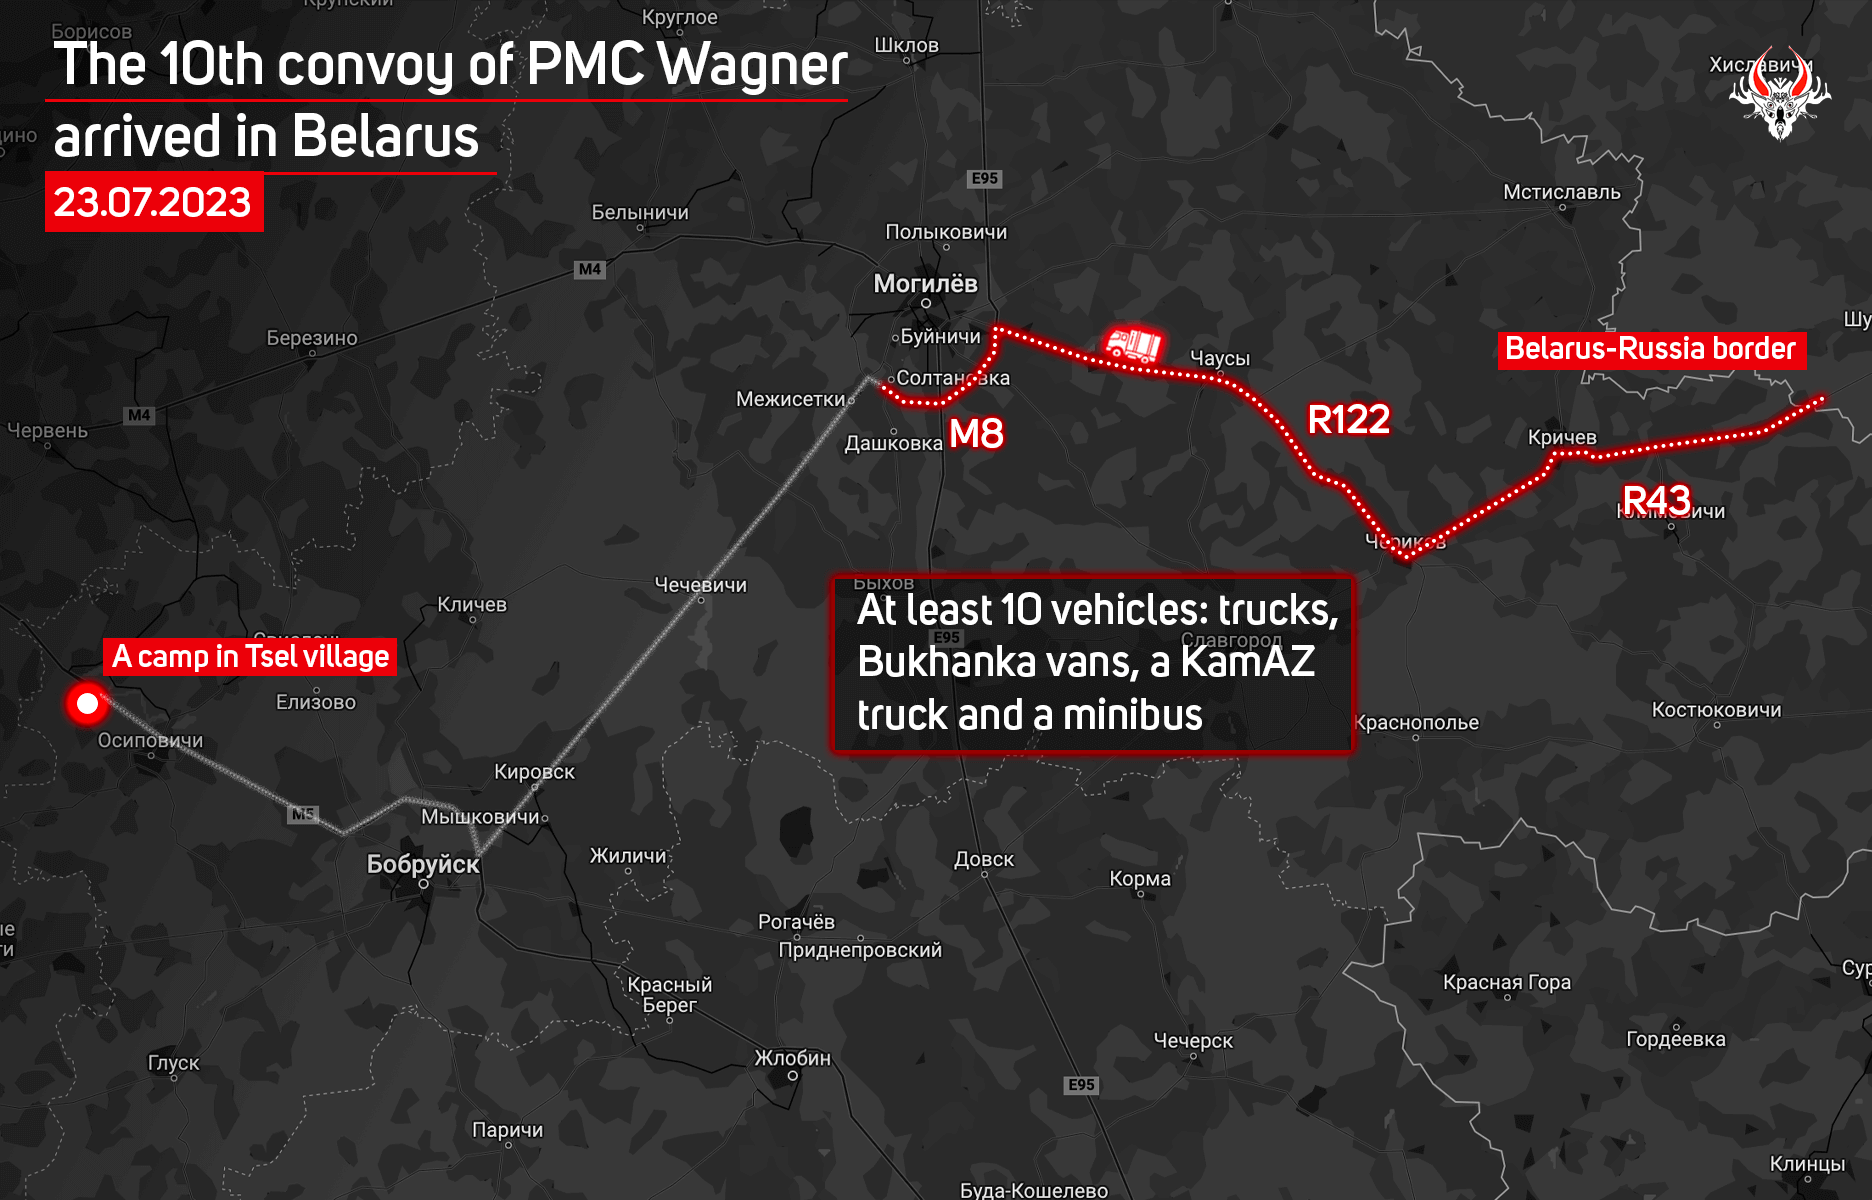 The 10th convoy of PMC Wagner arrived in Belarus